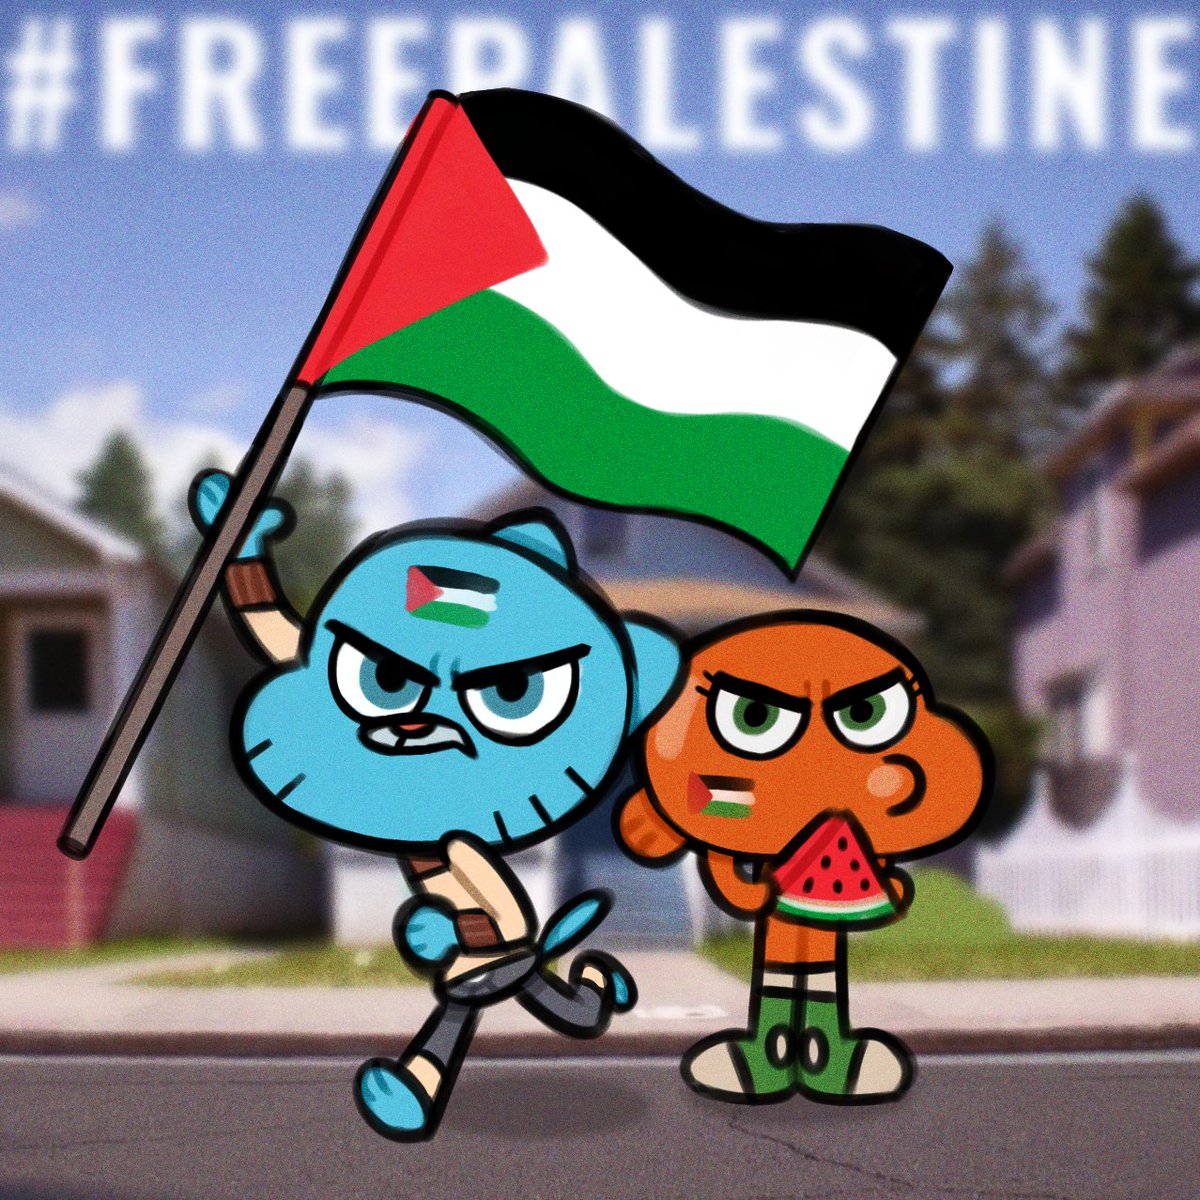 From the river to the sea, Palestine will be free🇵🇸🍉🍉 #CeasefireNOW #FreePalestine🇵🇸 #Rafah #AllEyesOnRafah #tawog #Gumball